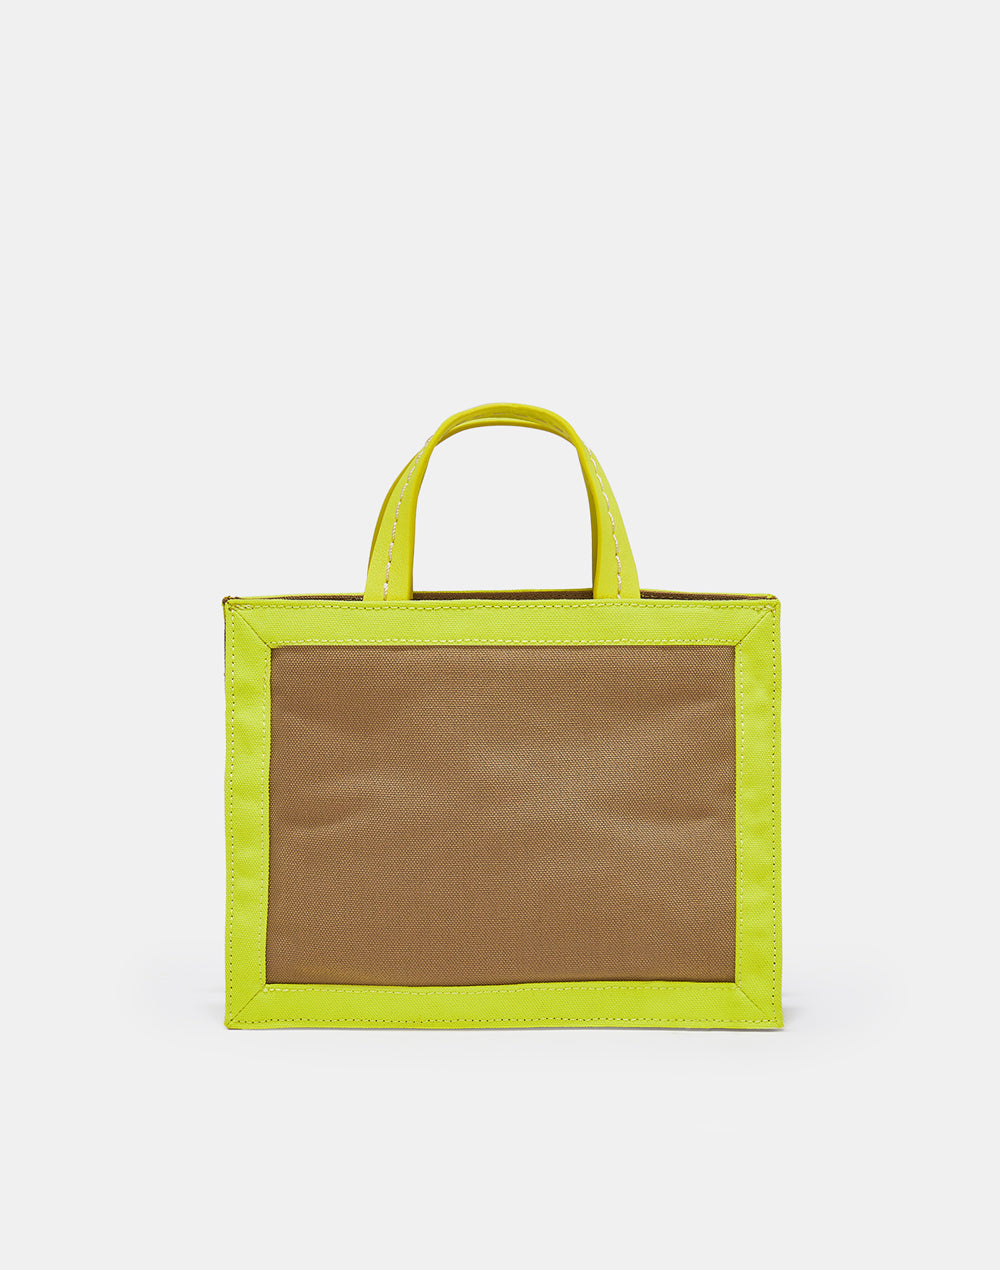 TOTE SMALL SIZE IN CANVAS